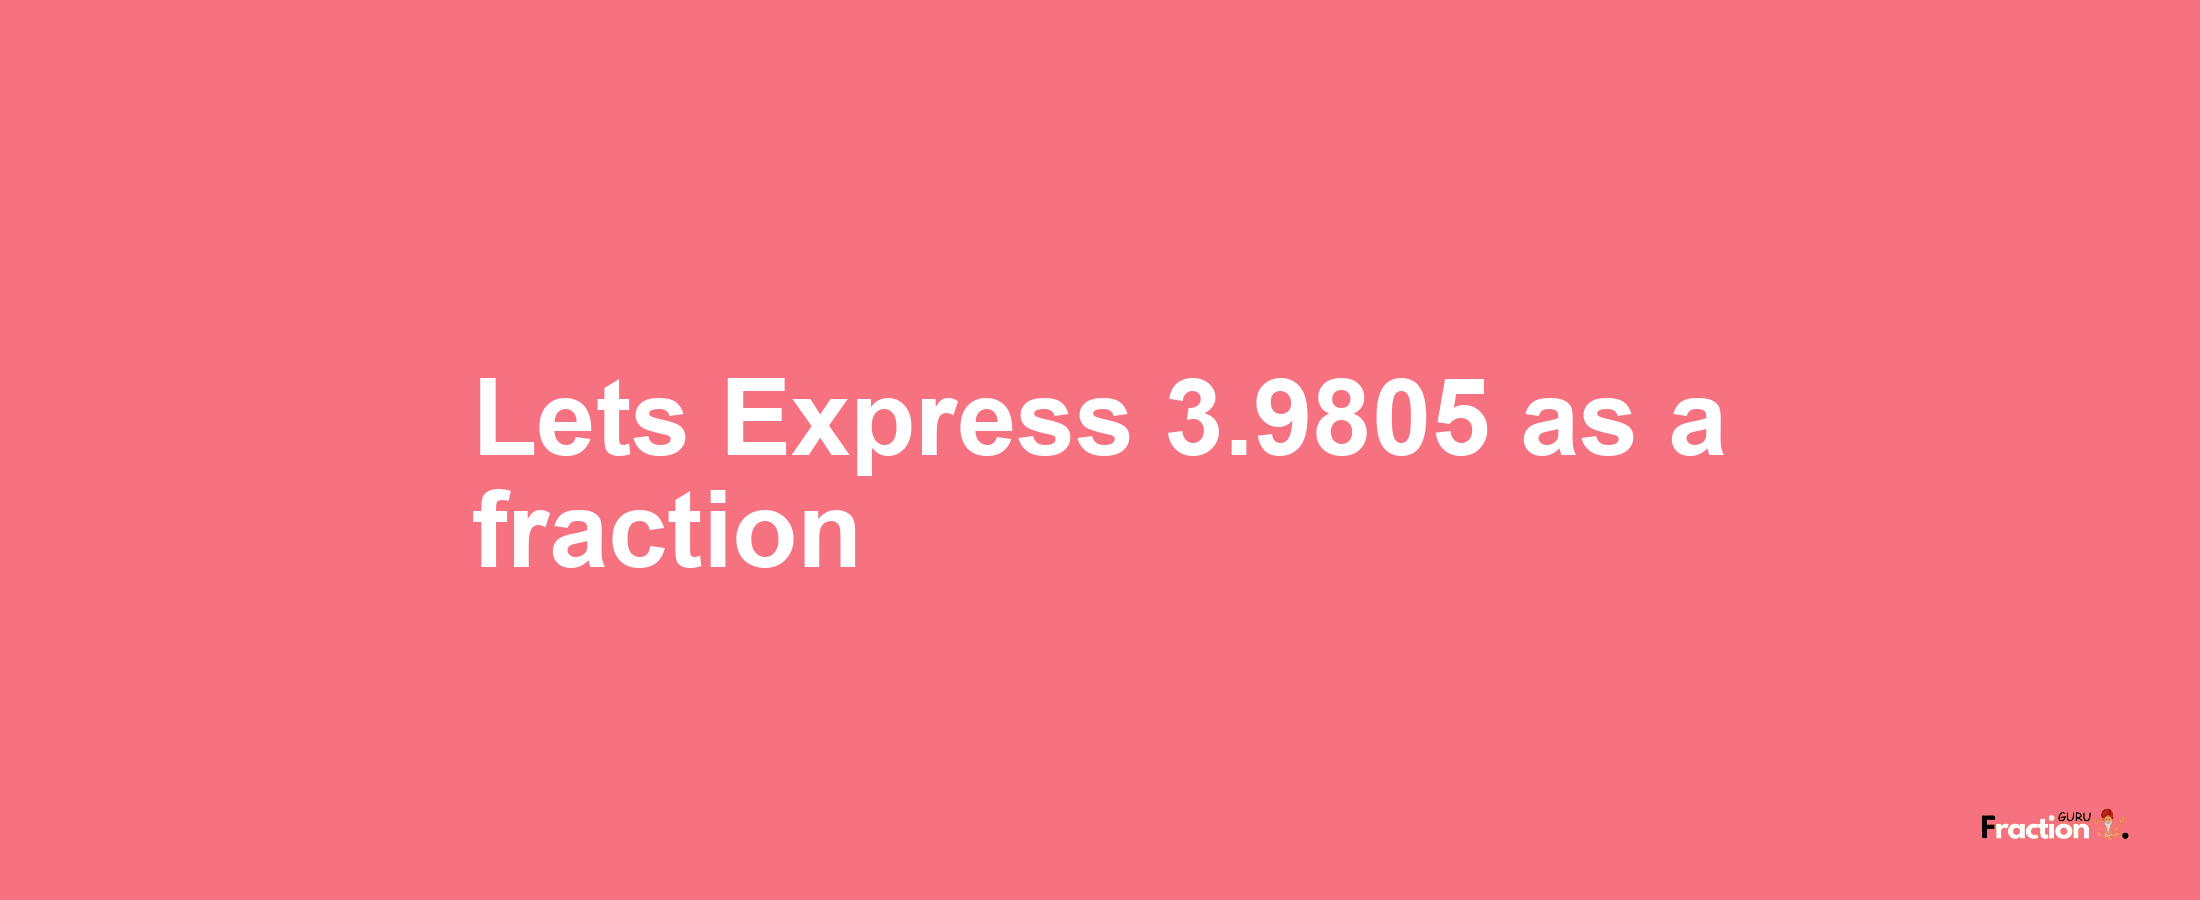 Lets Express 3.9805 as afraction